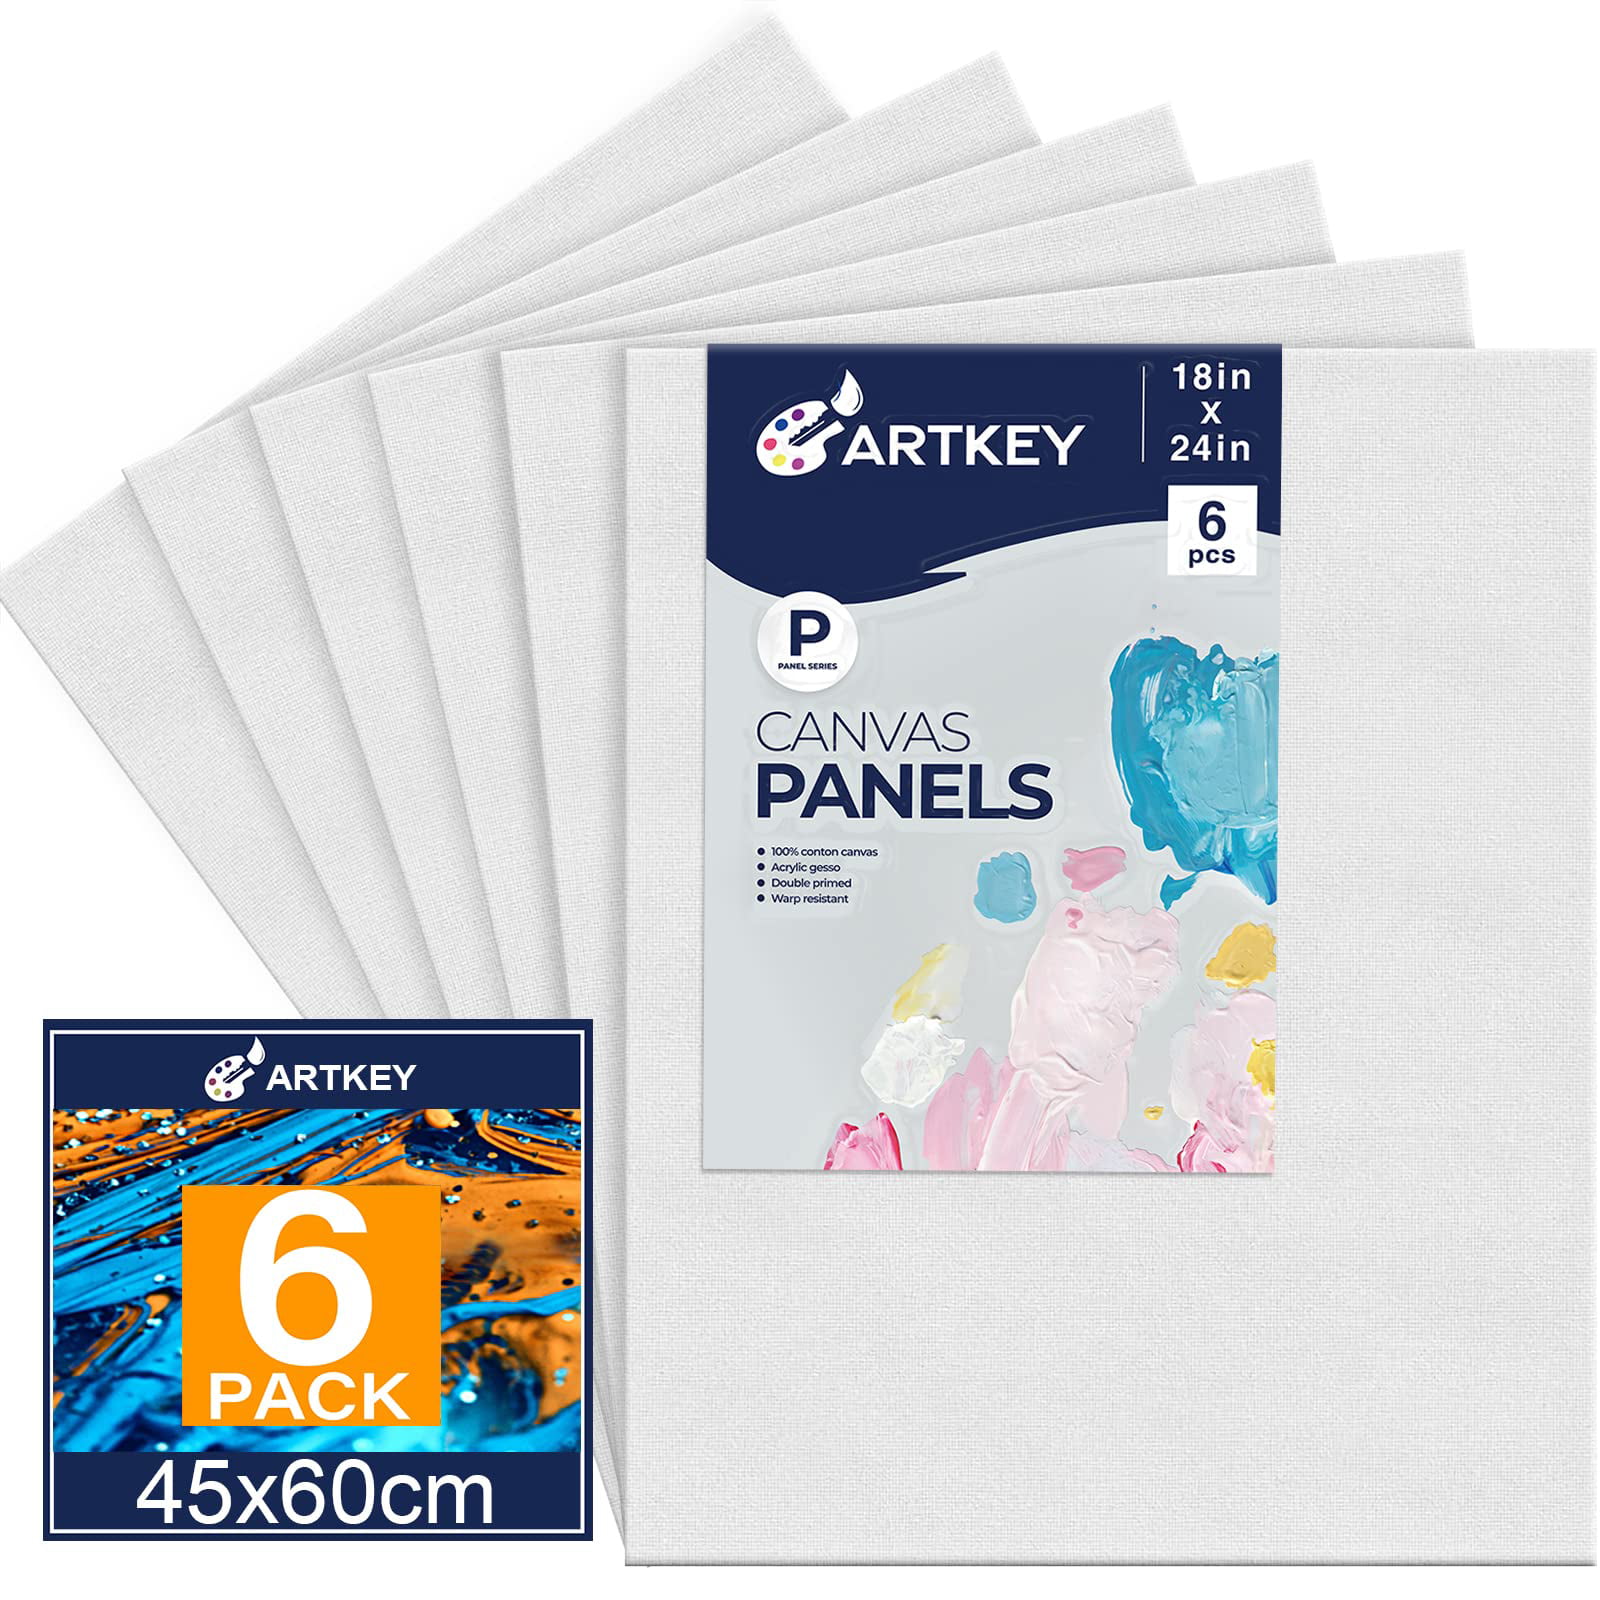 Chivalry A3 Canvas Pad-280Grams